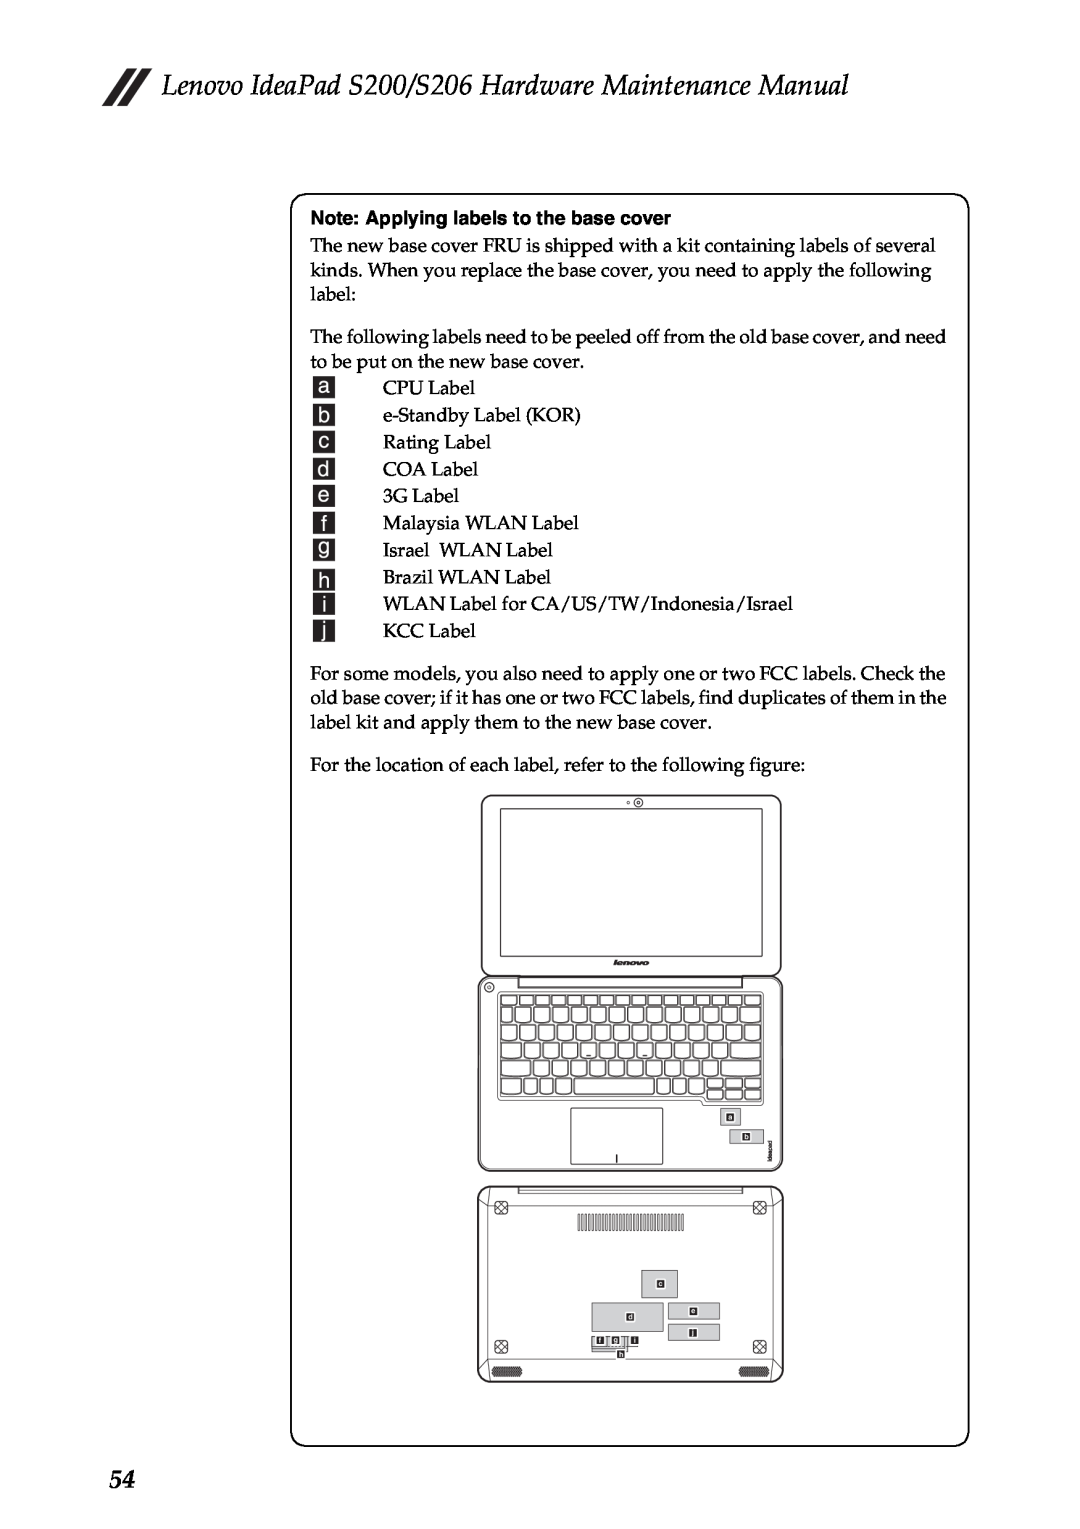 Lenovo S206, S200 manual Note Applying labels to the base cover 